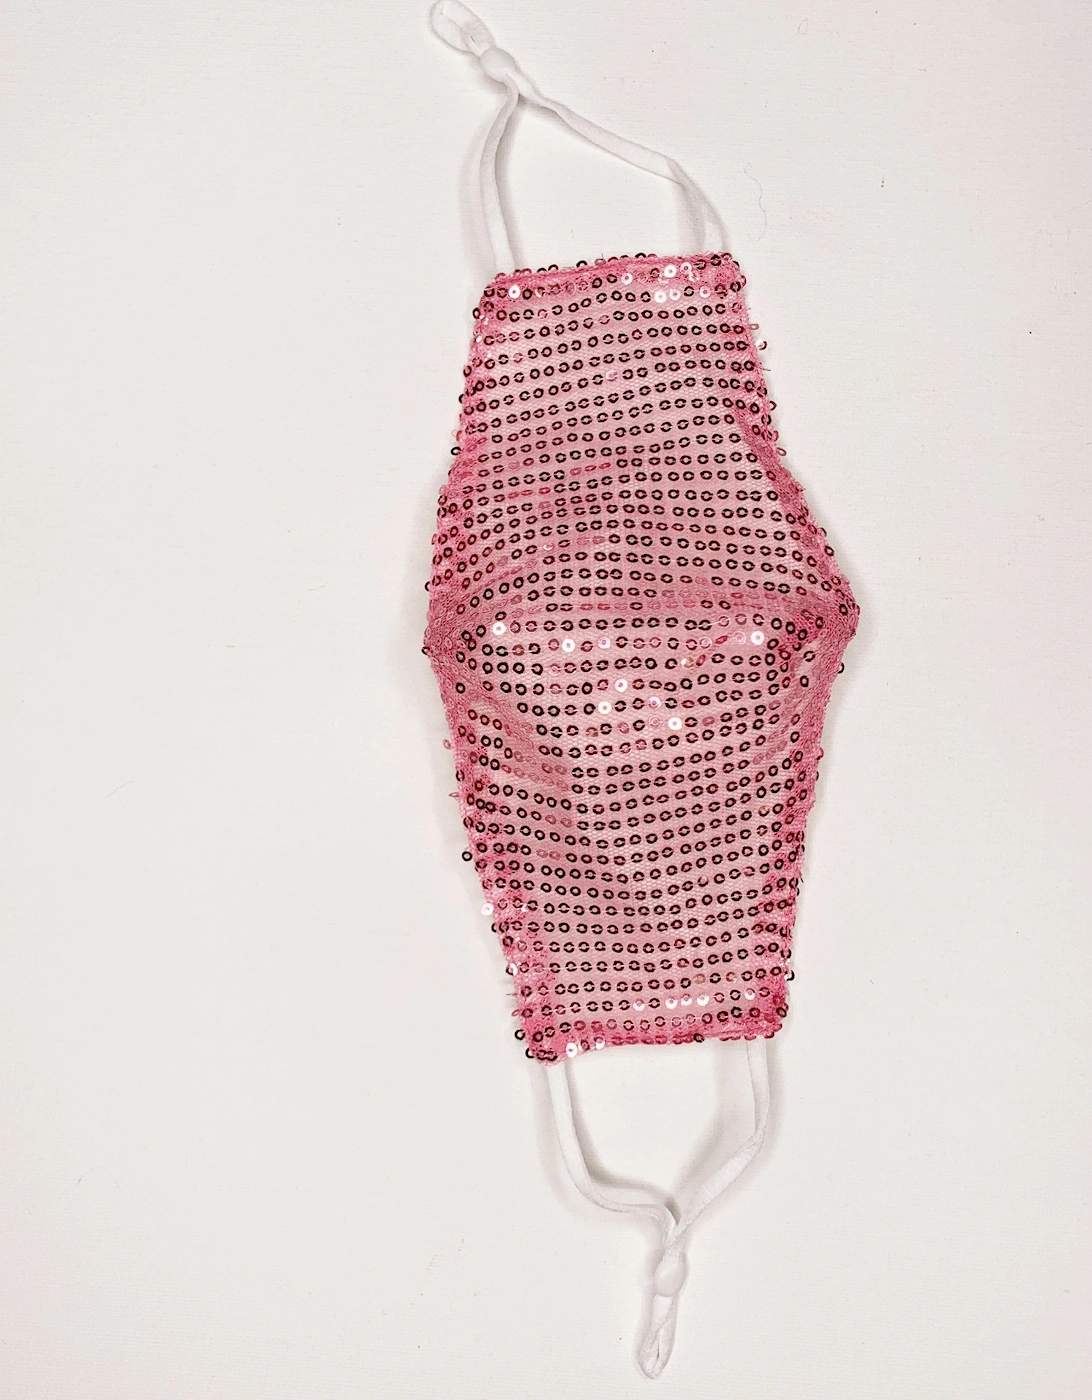 Pink Sequinned Fashion Cotton Face Mask